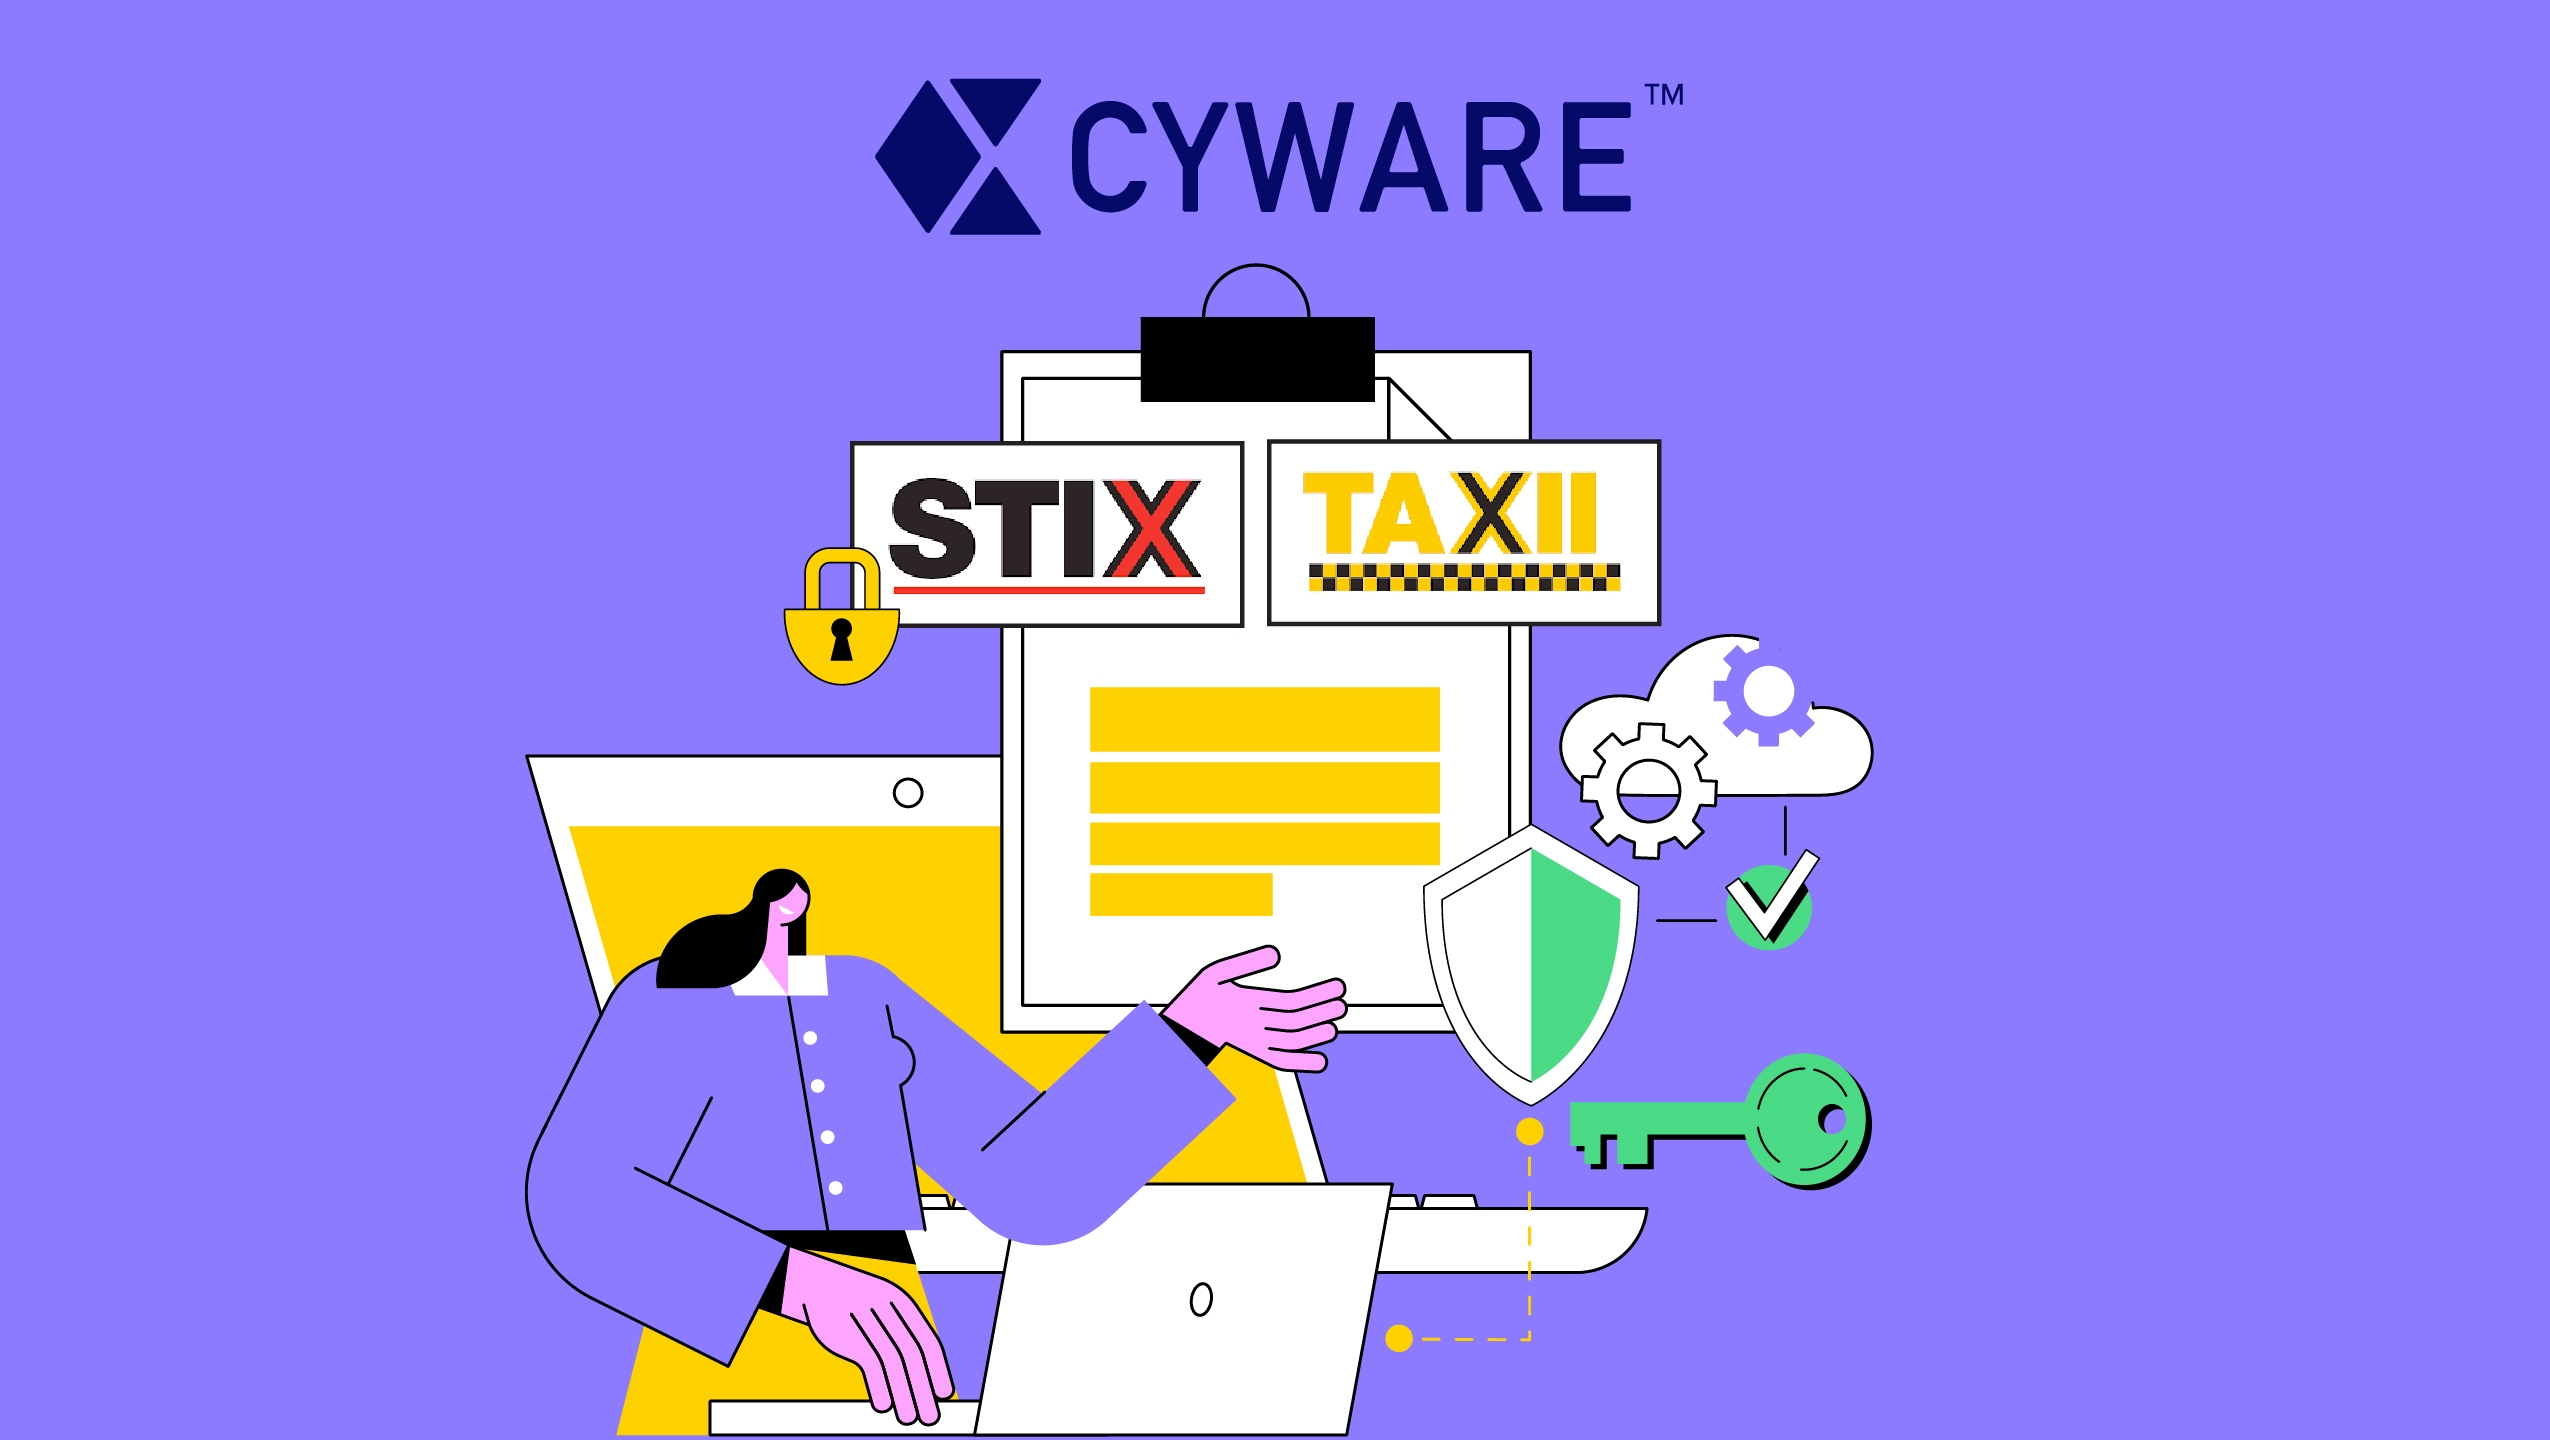 What are STIX and TAXII?